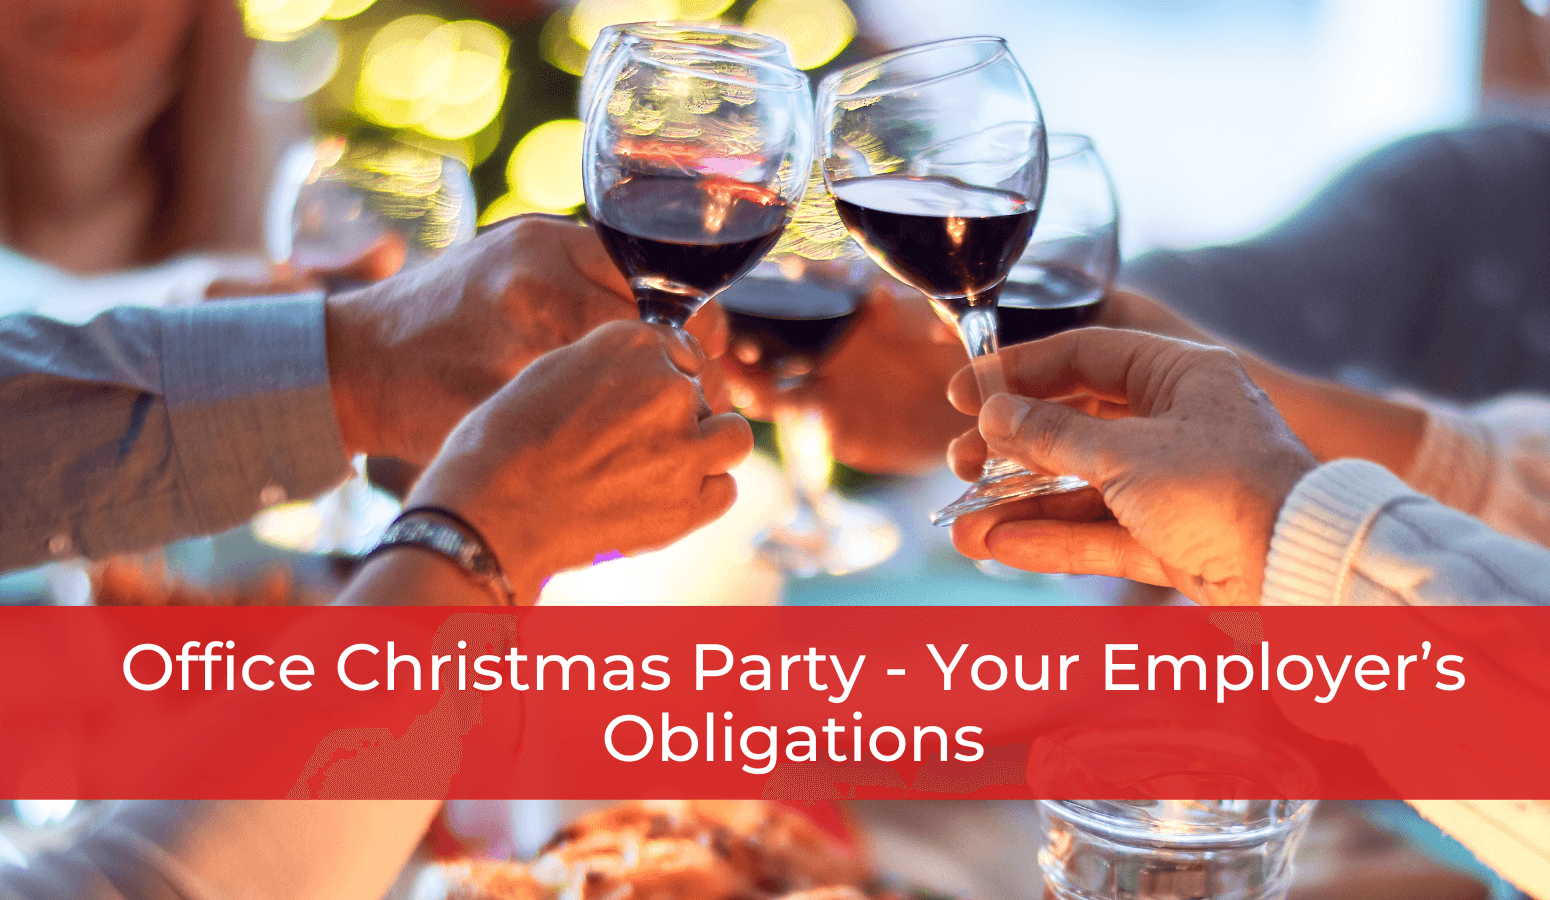 Featured image for “Office Christmas Party – Your Employer’s Obligations”